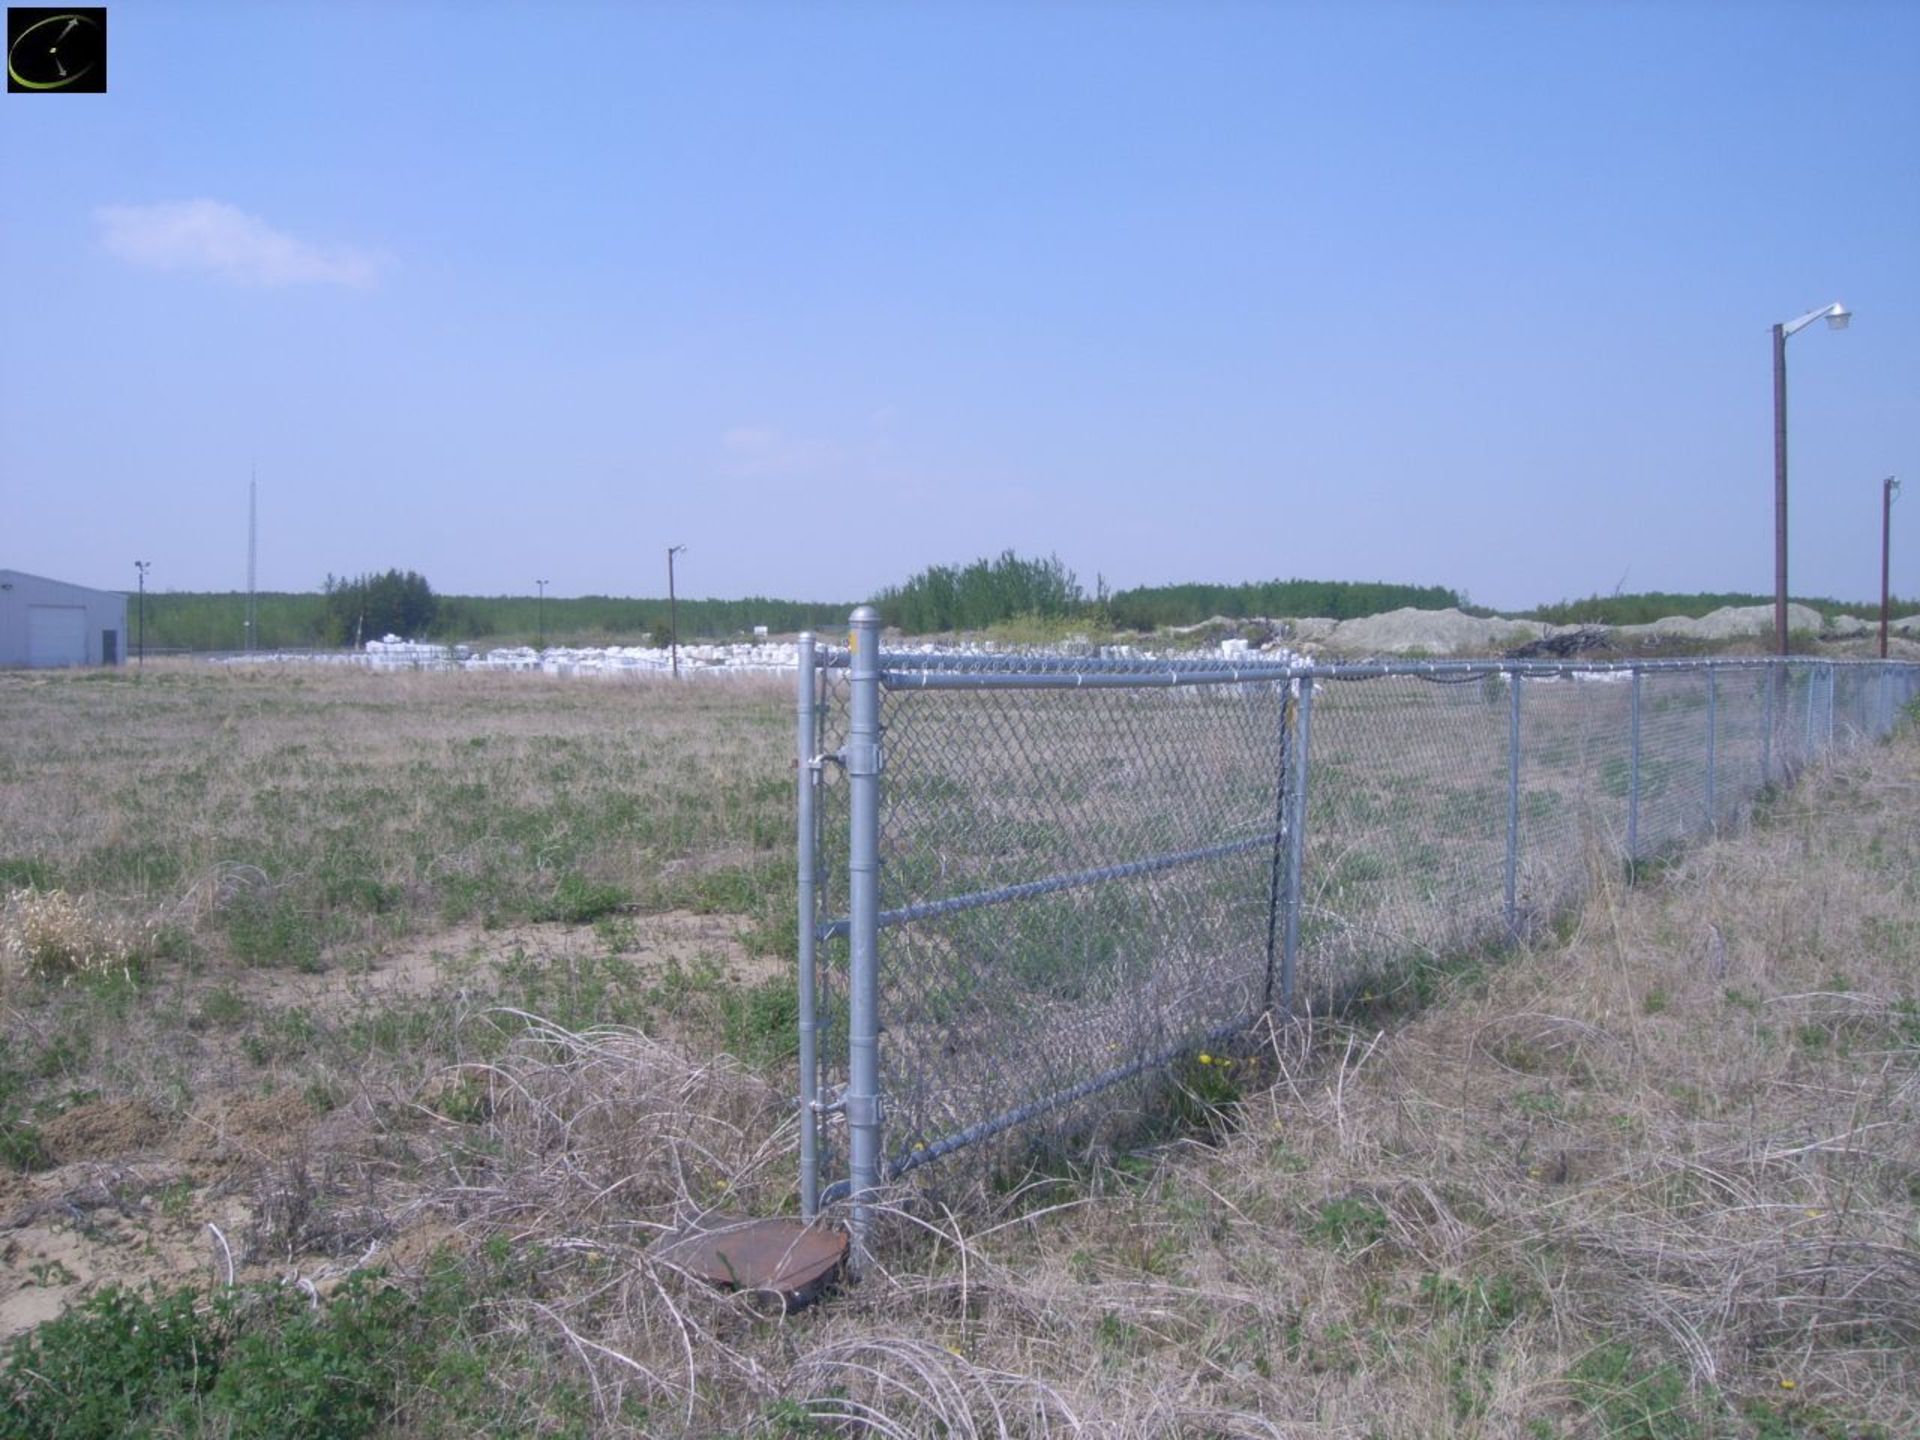 Approx. 900 Meters Of Chain Link Fencing w/ Misc. Gates. Posts Are Cemented In The Ground - Image 4 of 14